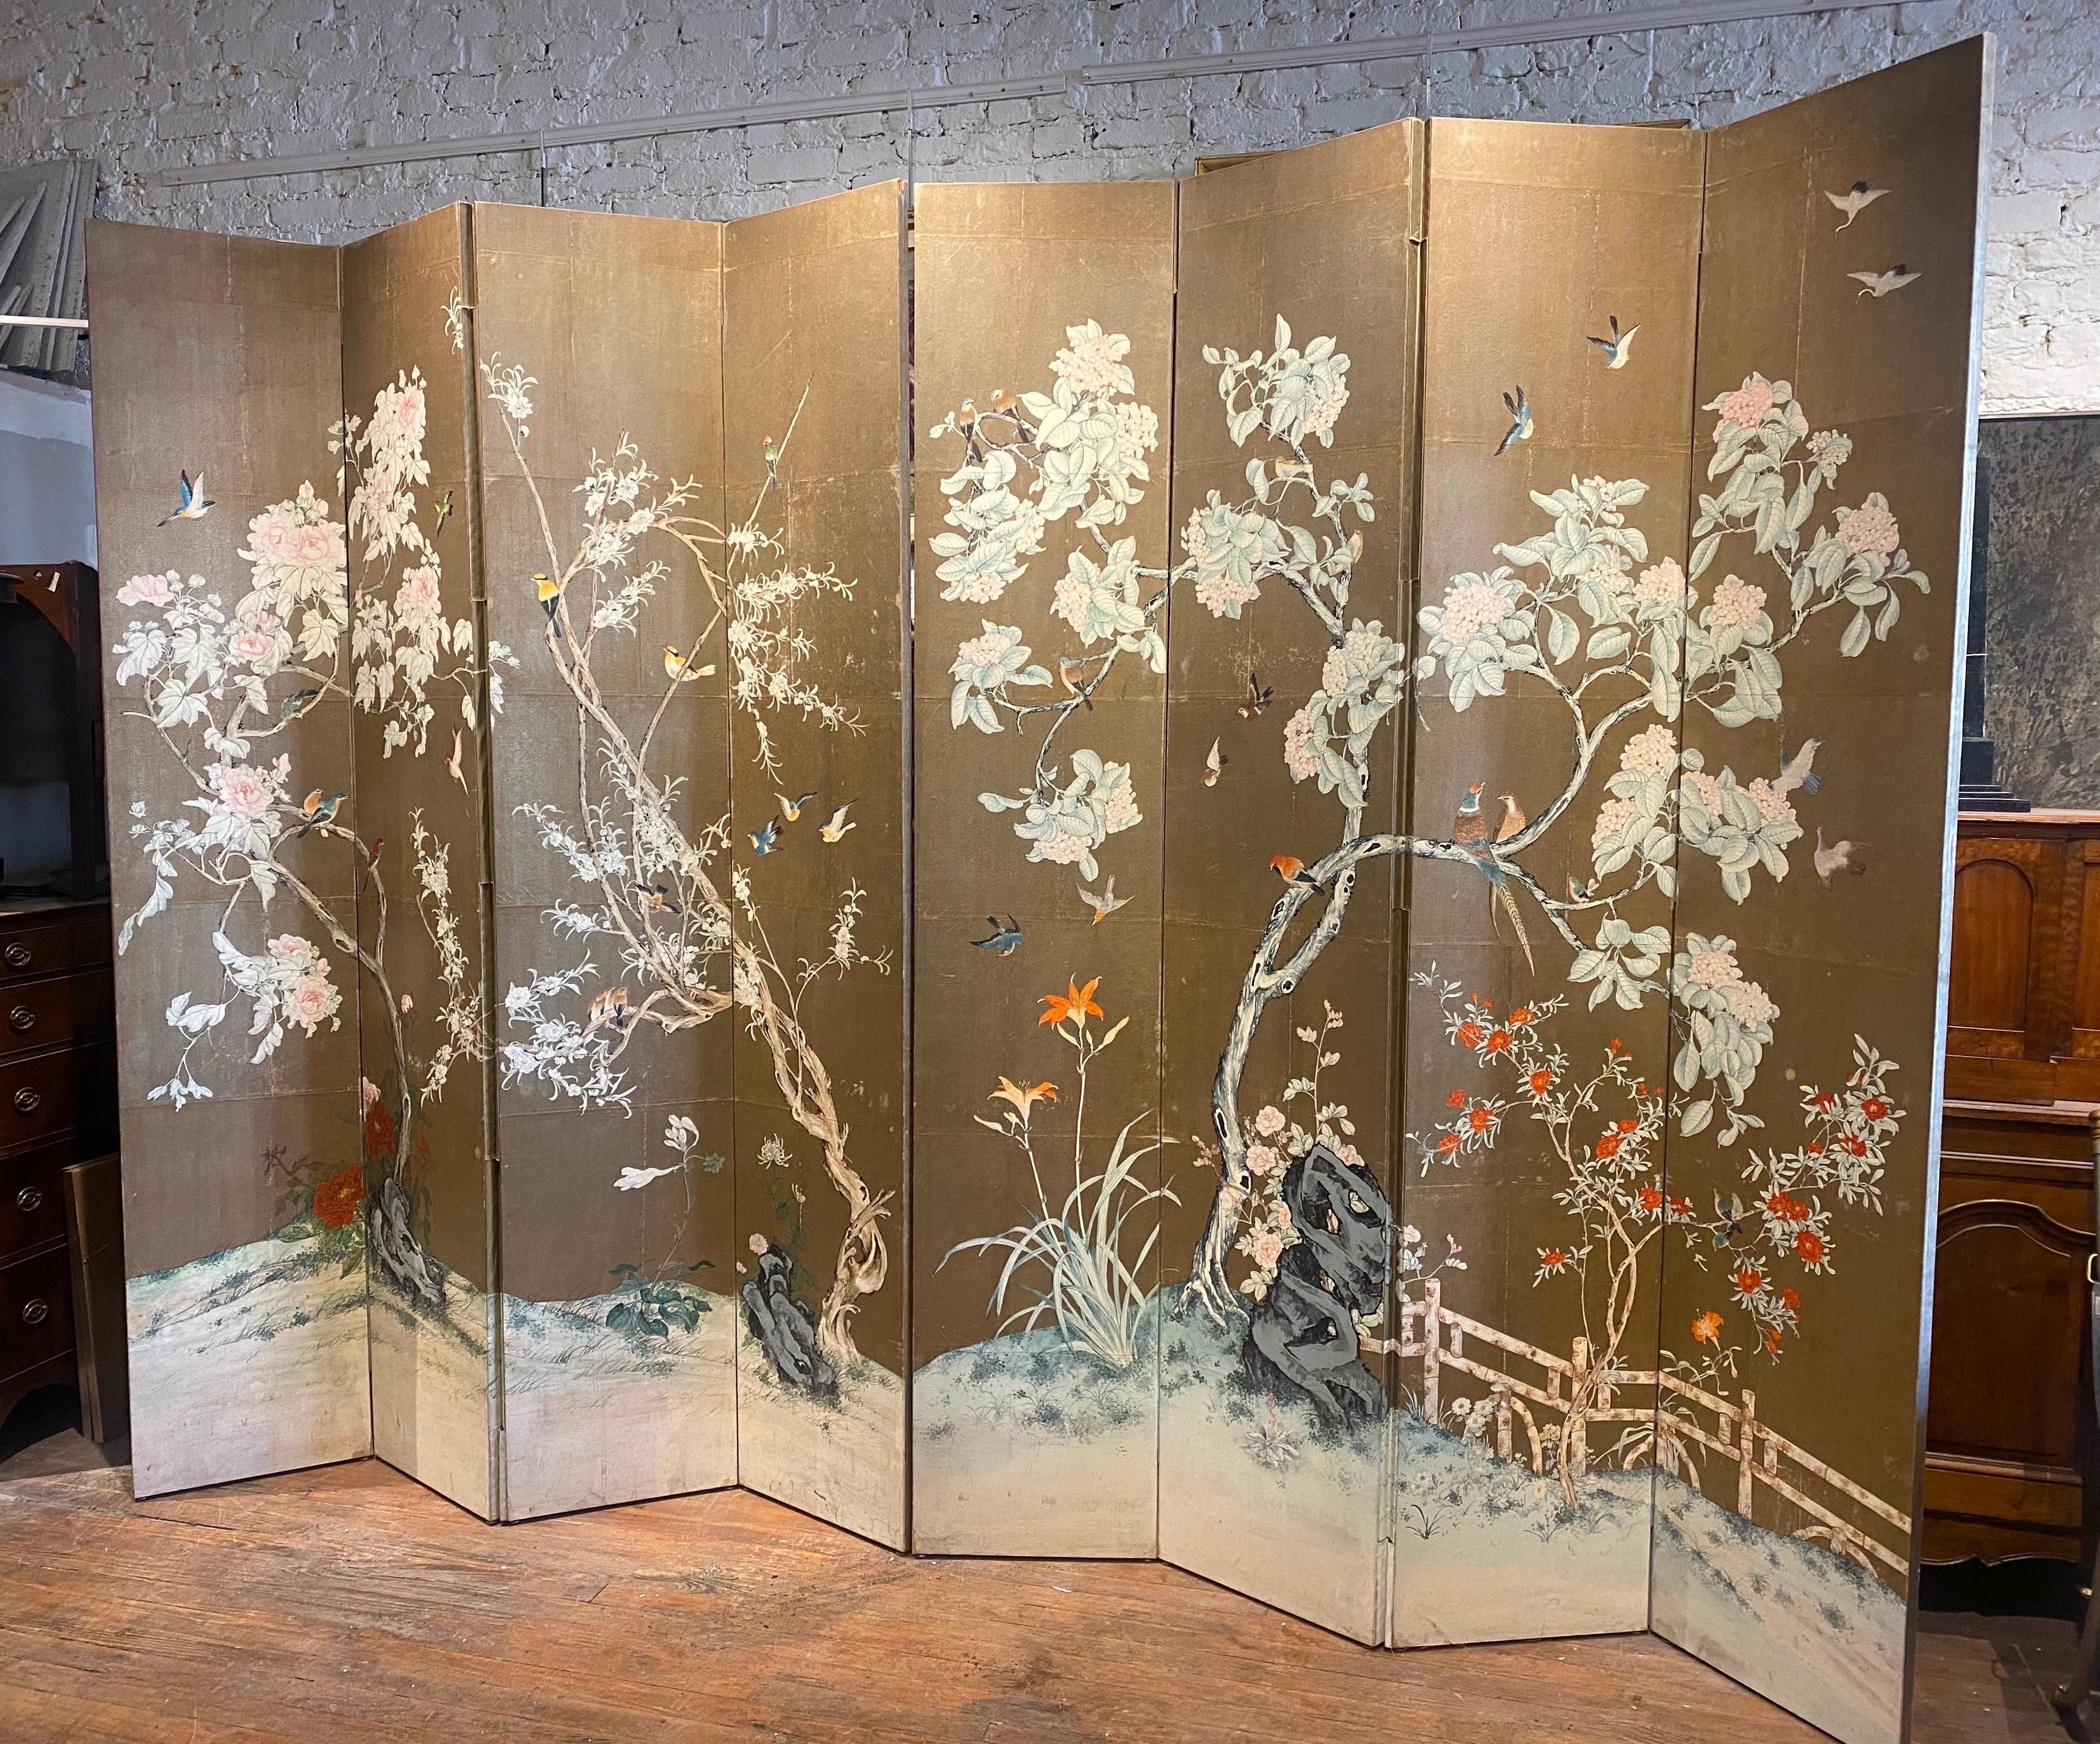 Incredible midcentury 8-panel hand painted gold leaf screen, probably by Gracie.

2 sections of 4 connected panels with a continuous scene of various birds and flowers. Standing 8’8” high, each panel is 19” wide. 

In addition to being used as a